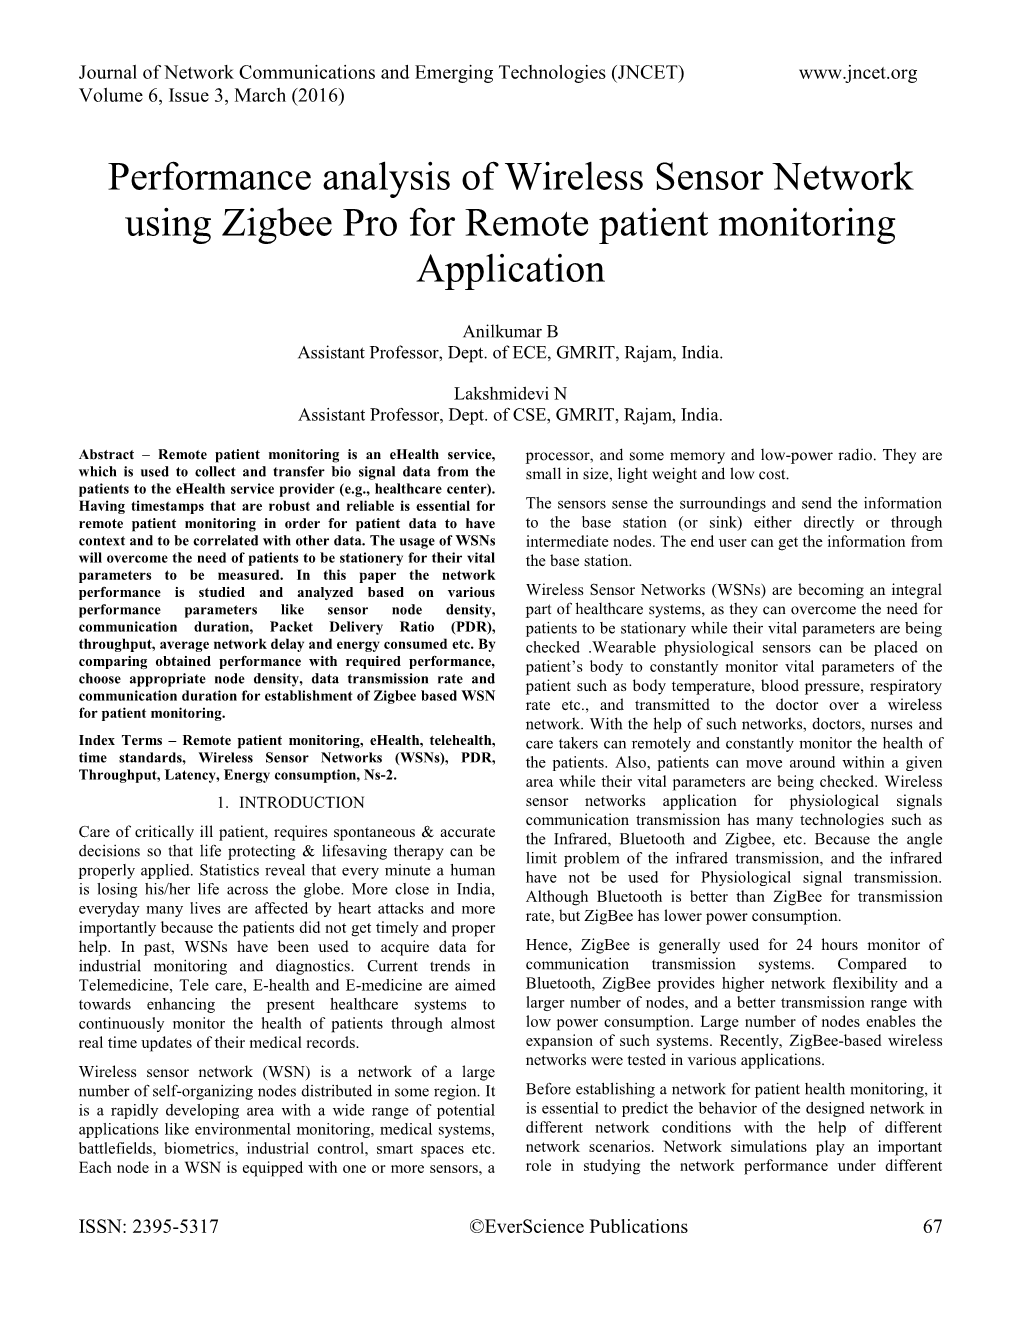 Performance Analysis of Wireless Sensor Network Using Zigbee Pro for Remote Patient Monitoring Application